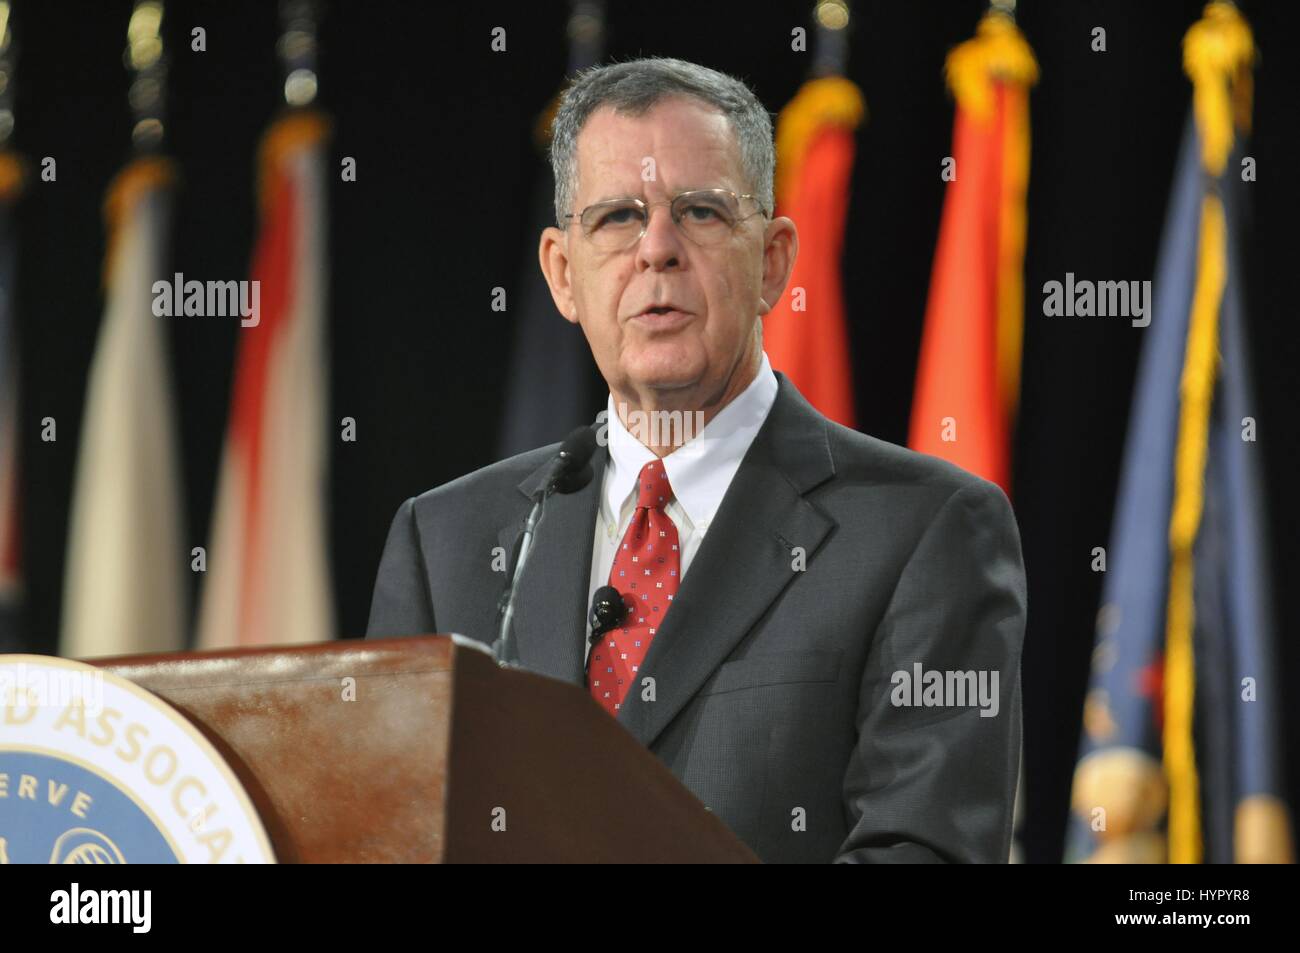 U.S. Reserve Affairs Assistant Secretary of Defense Dennis McCarthy speaks during the 131st Guard Association of the United States General Conference September 12, 2009 in Nashville, Tennessee. Stock Photo